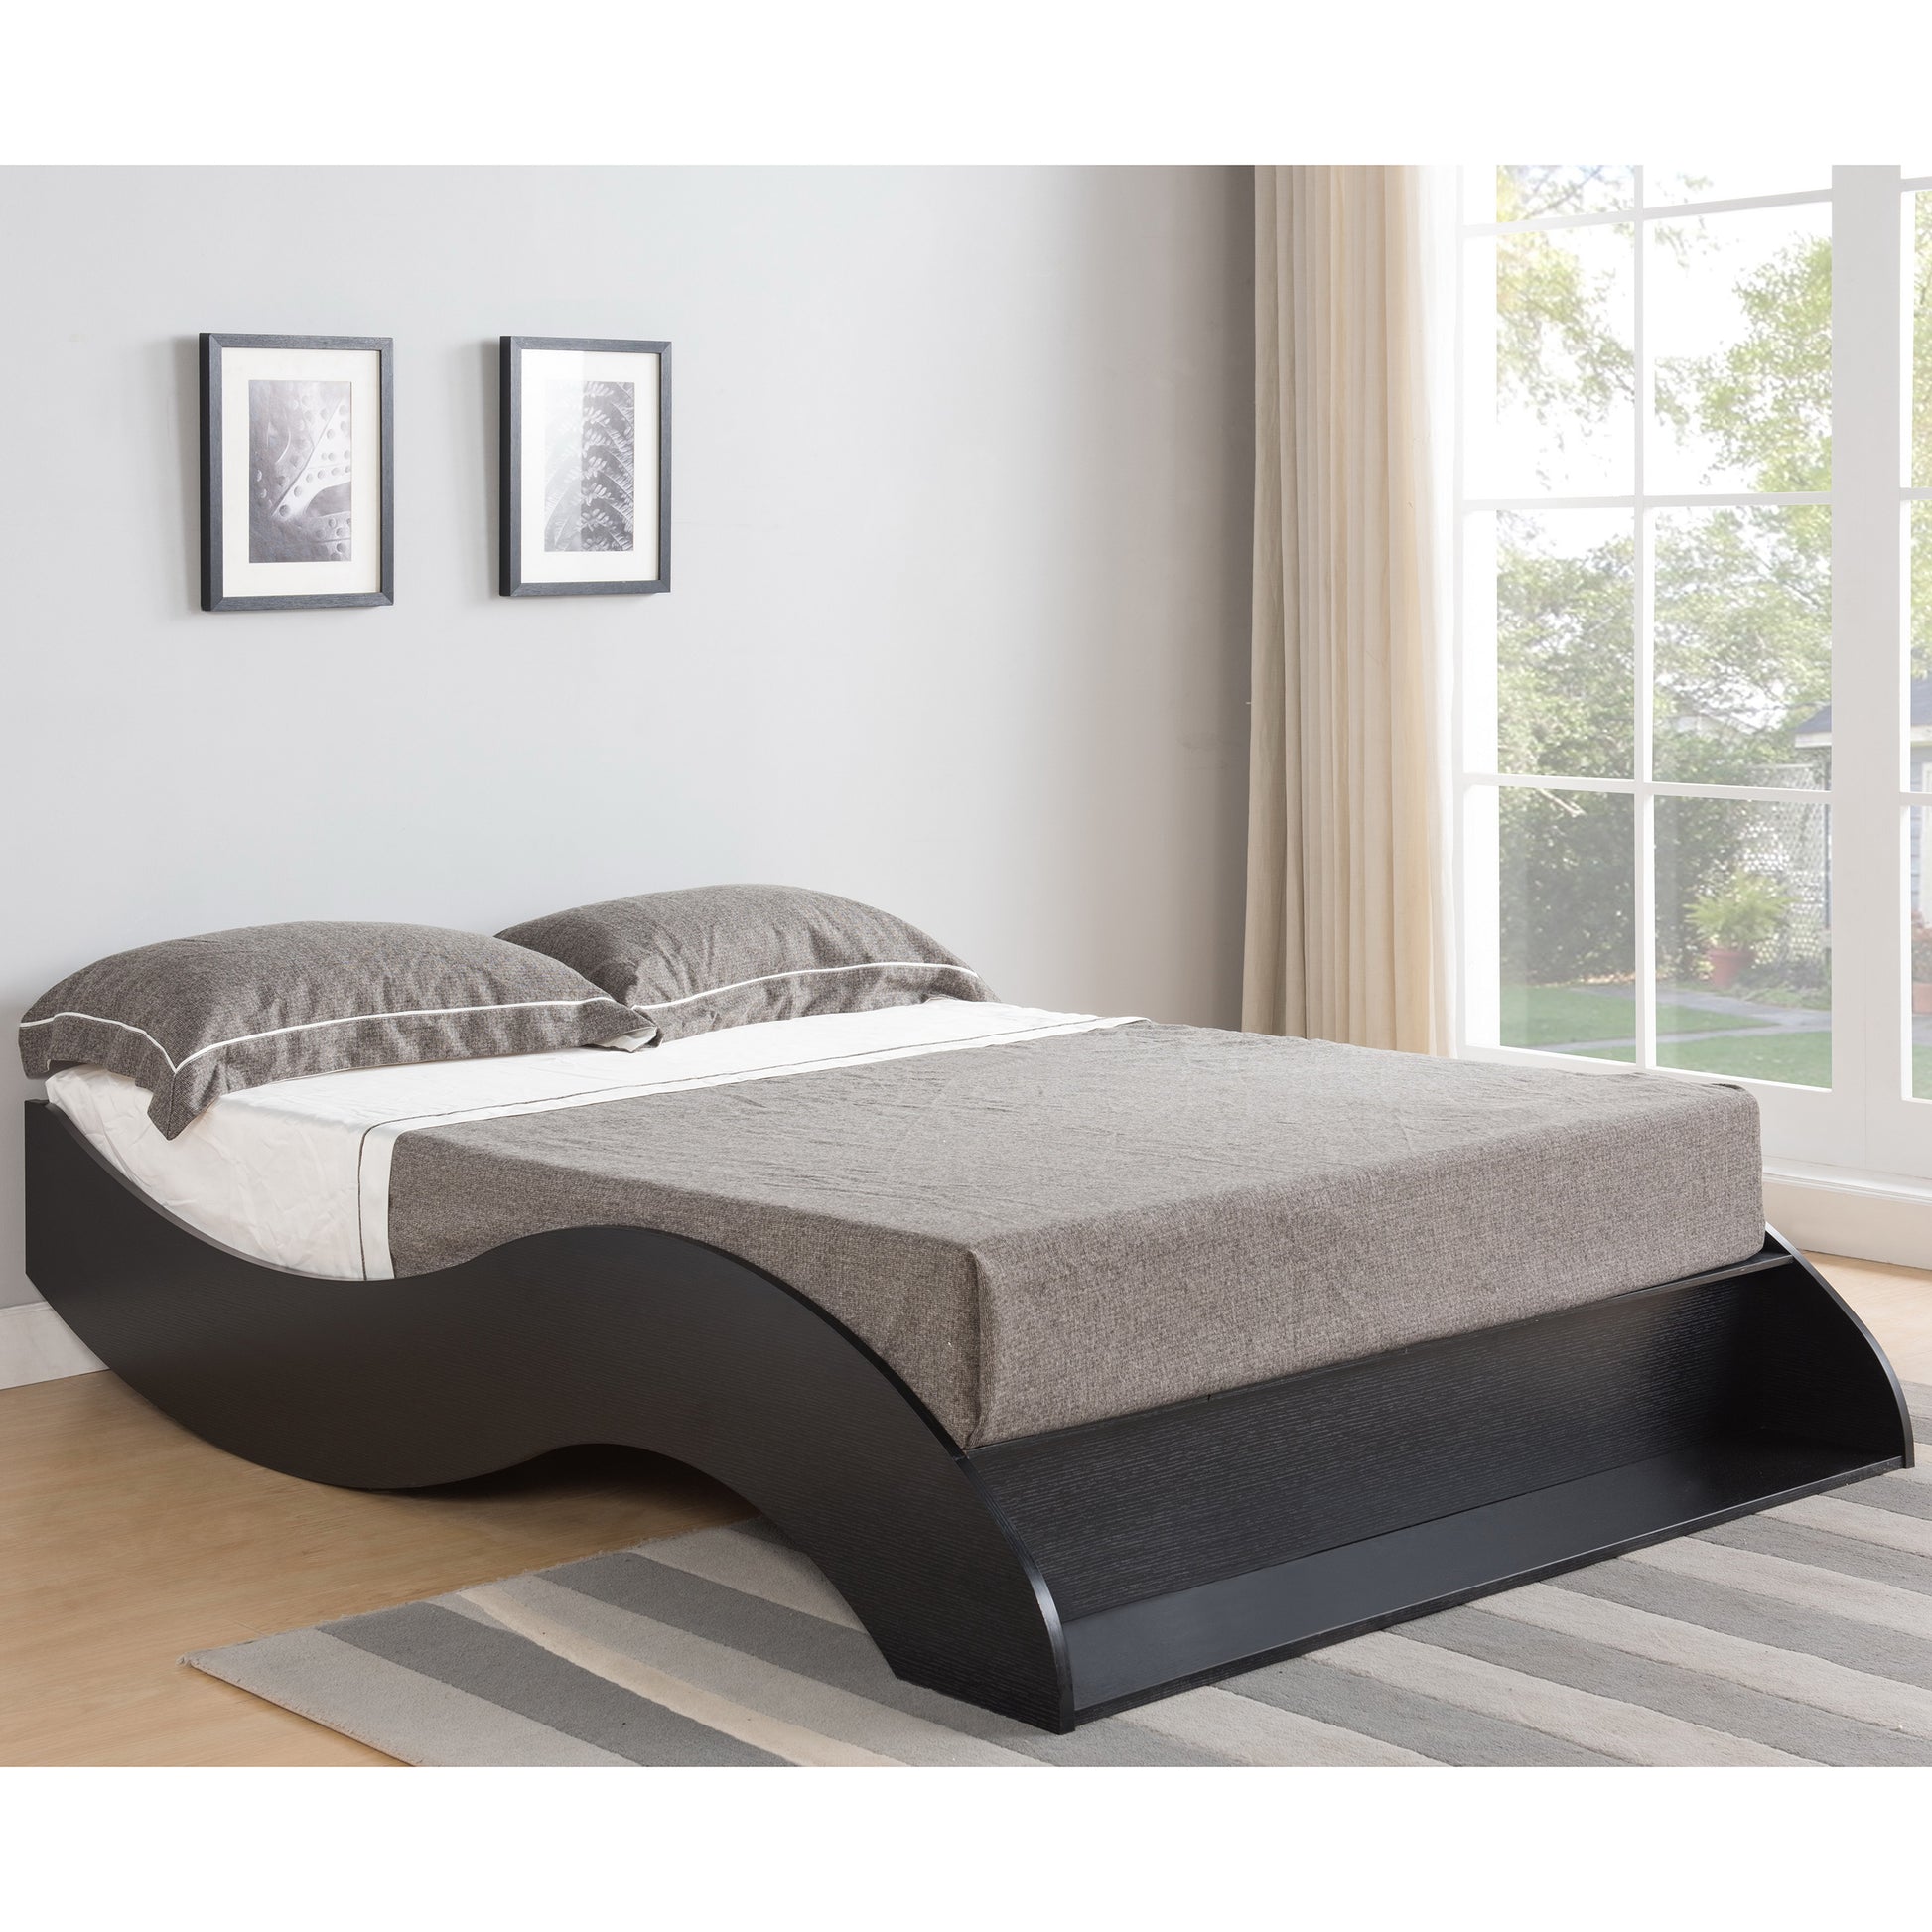 Right angled contemporary cappuccino curvy queen platform bed in a bedroom with accessories